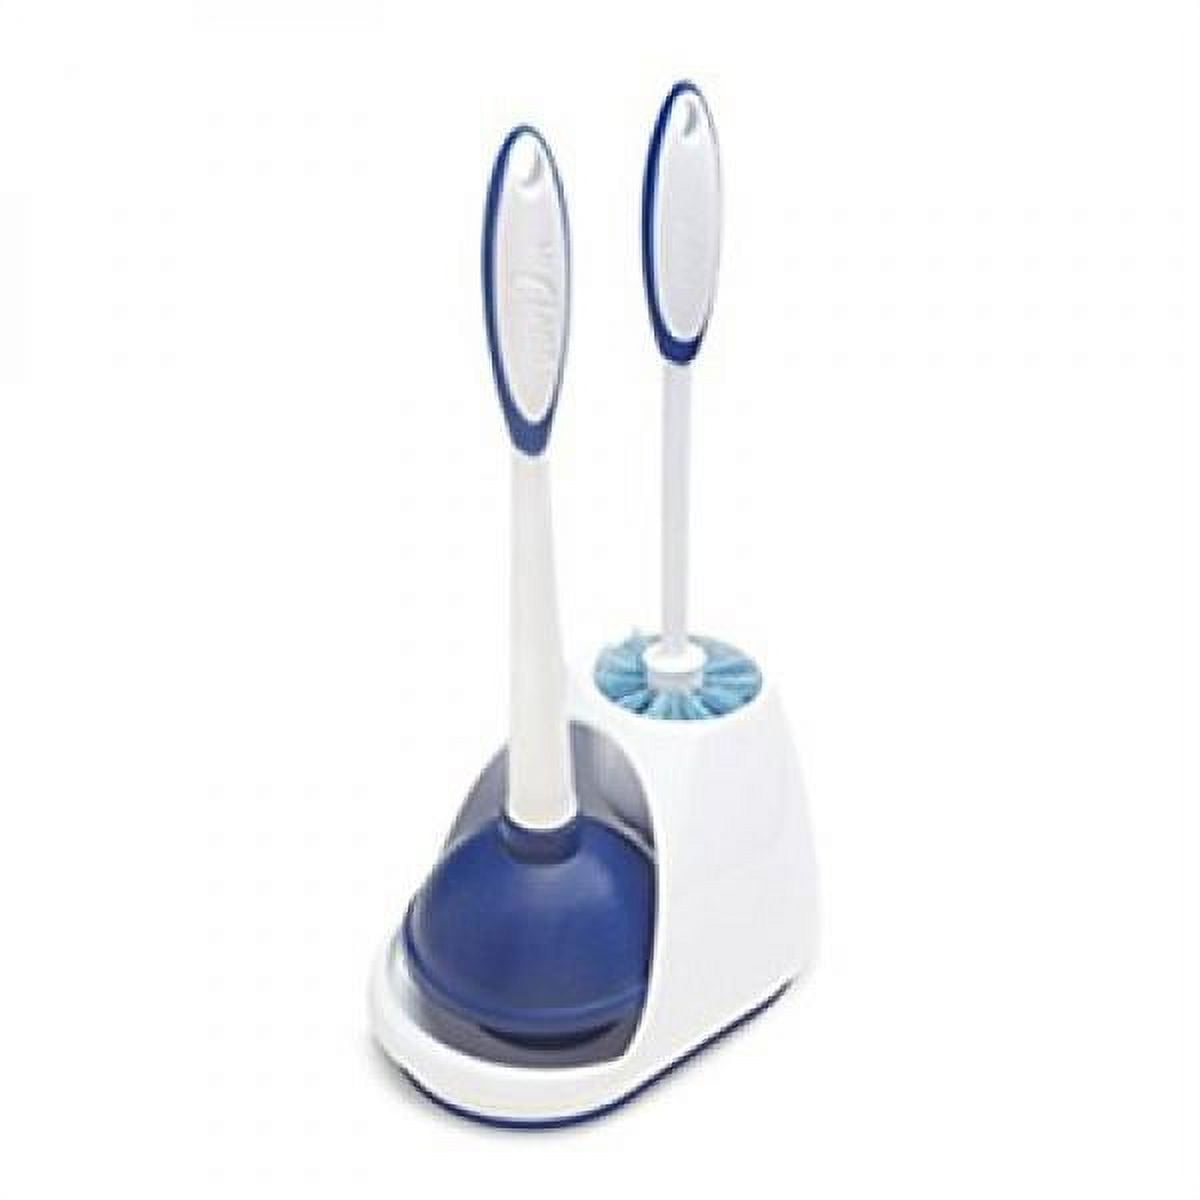 Rubbermaid Toilet Bowl Brush with Caddy Holder with Caddy Holder Cobalt Blue (fg6b9204coblt)